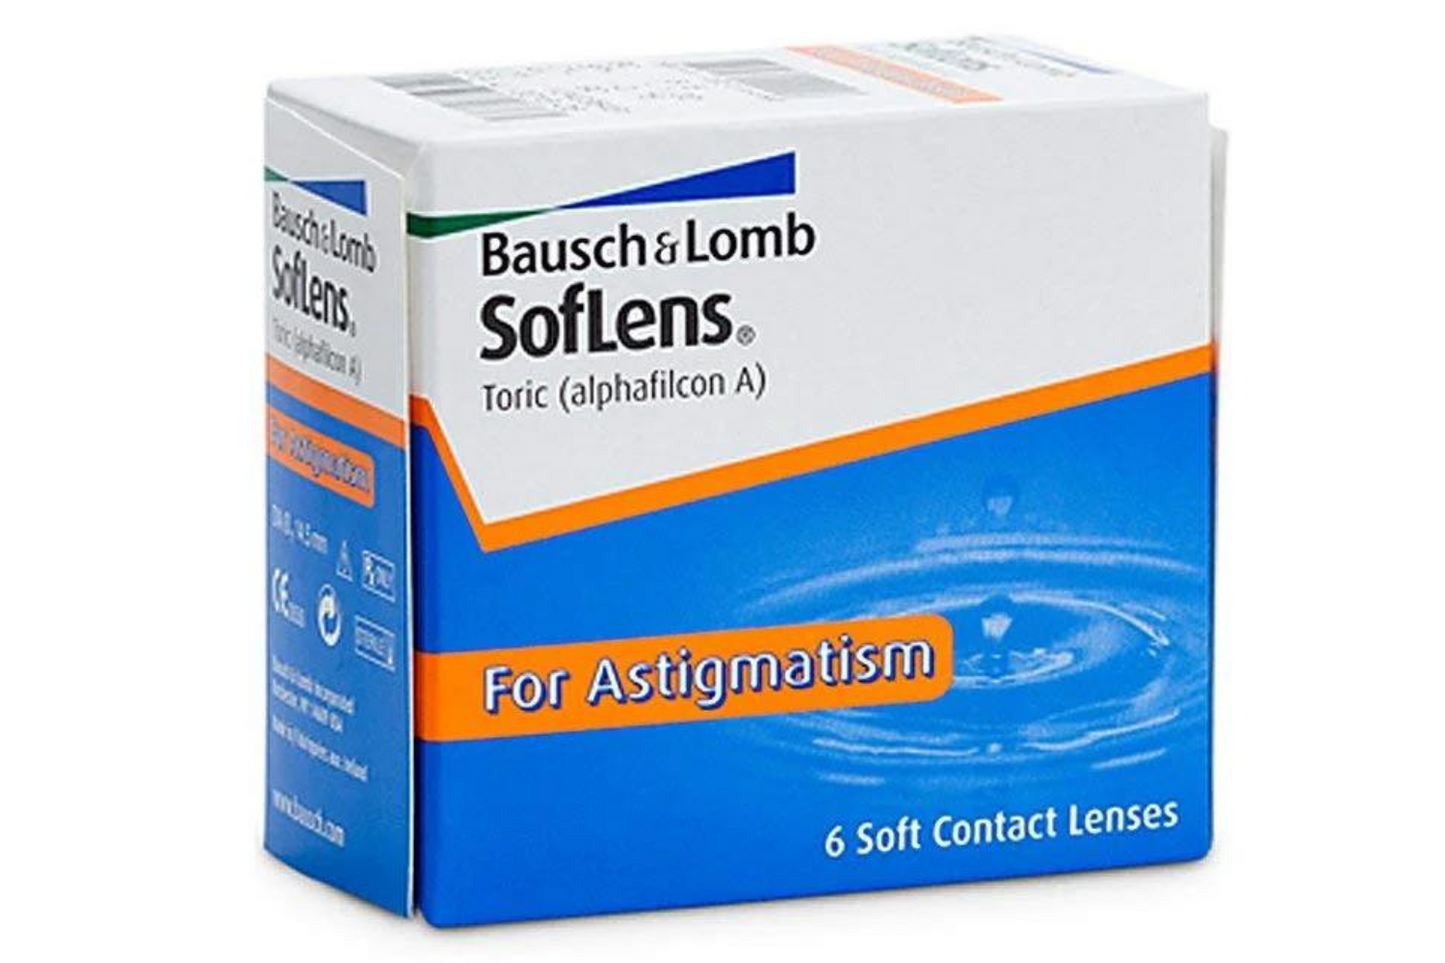 Bausch And Lomb Soft Lens 66 For Astigmatism (6 Lenses) Box